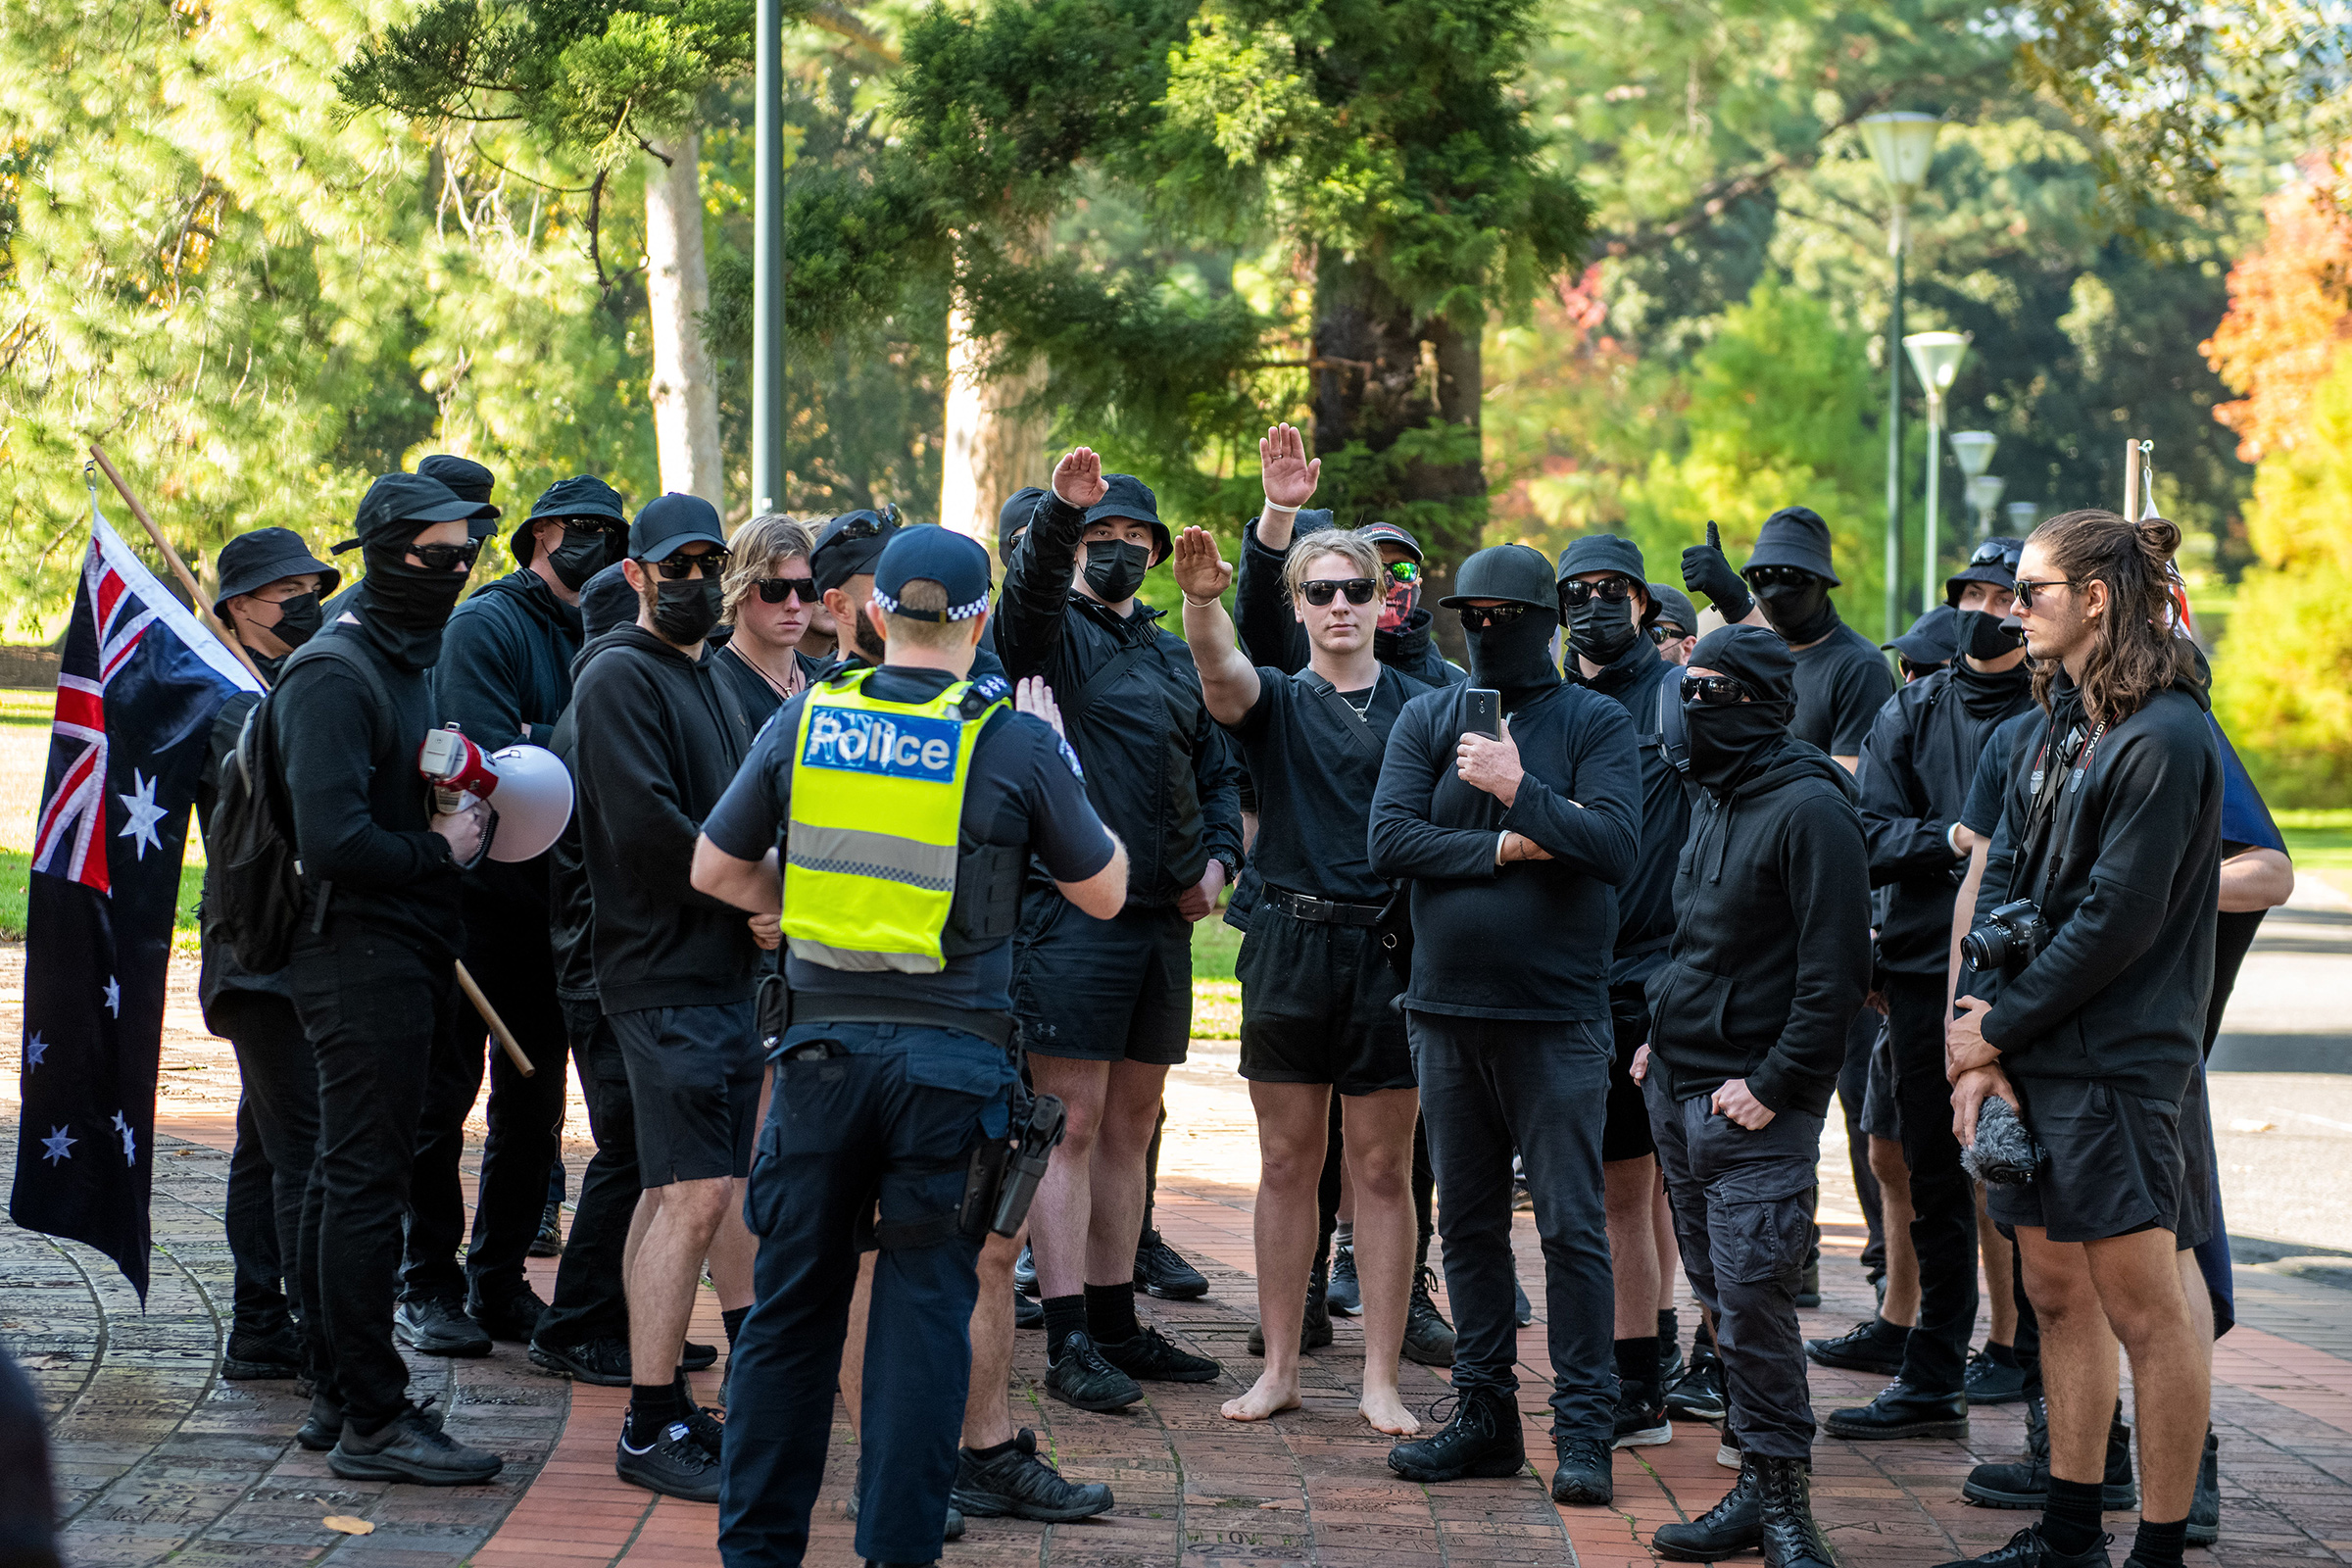 A police inspector tries to order neo-Nazis to leave the area during a heated political rally against racism, as far-right neo-Nazi groups held a demonstration at state parliament, leading to clashes and scuffles on May 13 in Melbourne, Australia.